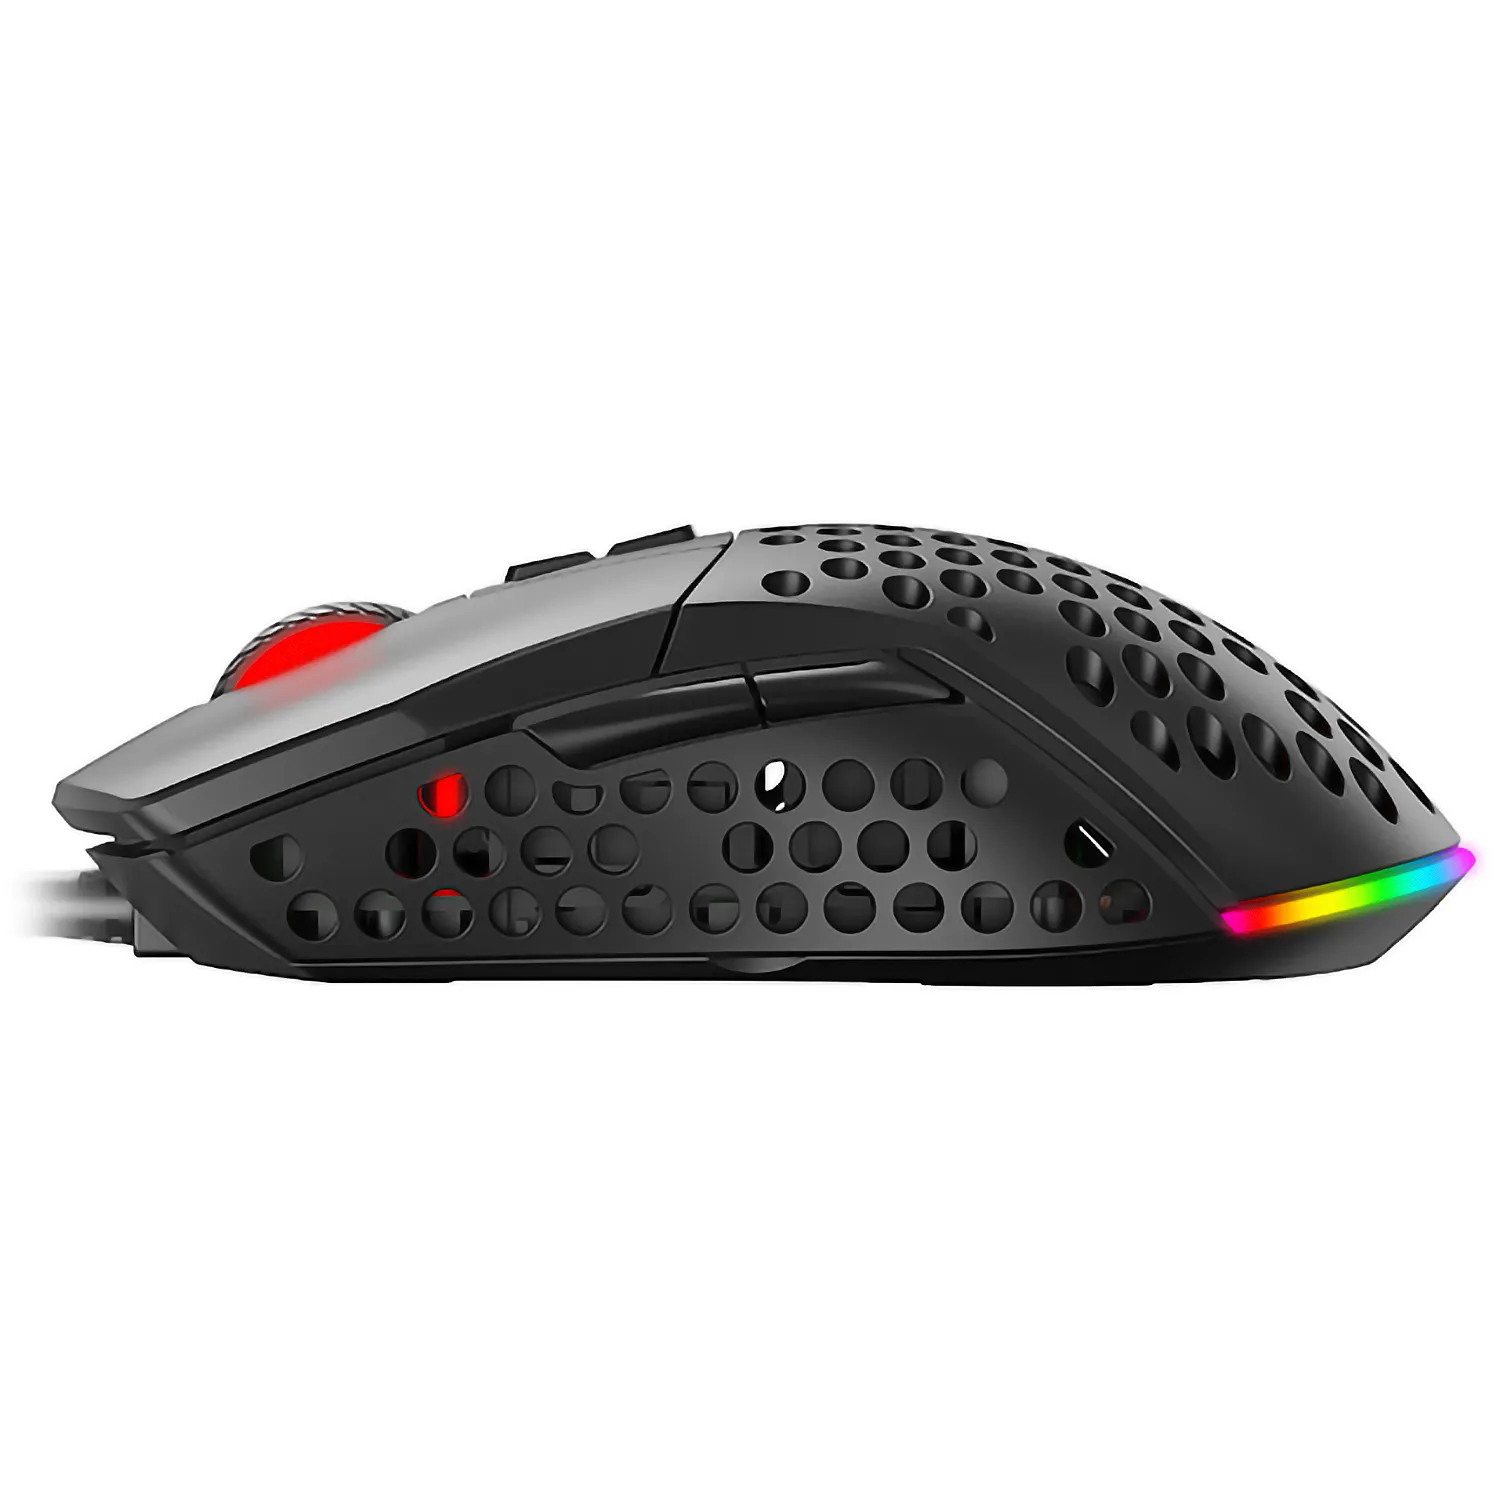 Mouse Gamer Programable RGB Havit MS885 Laterales Intercambiables